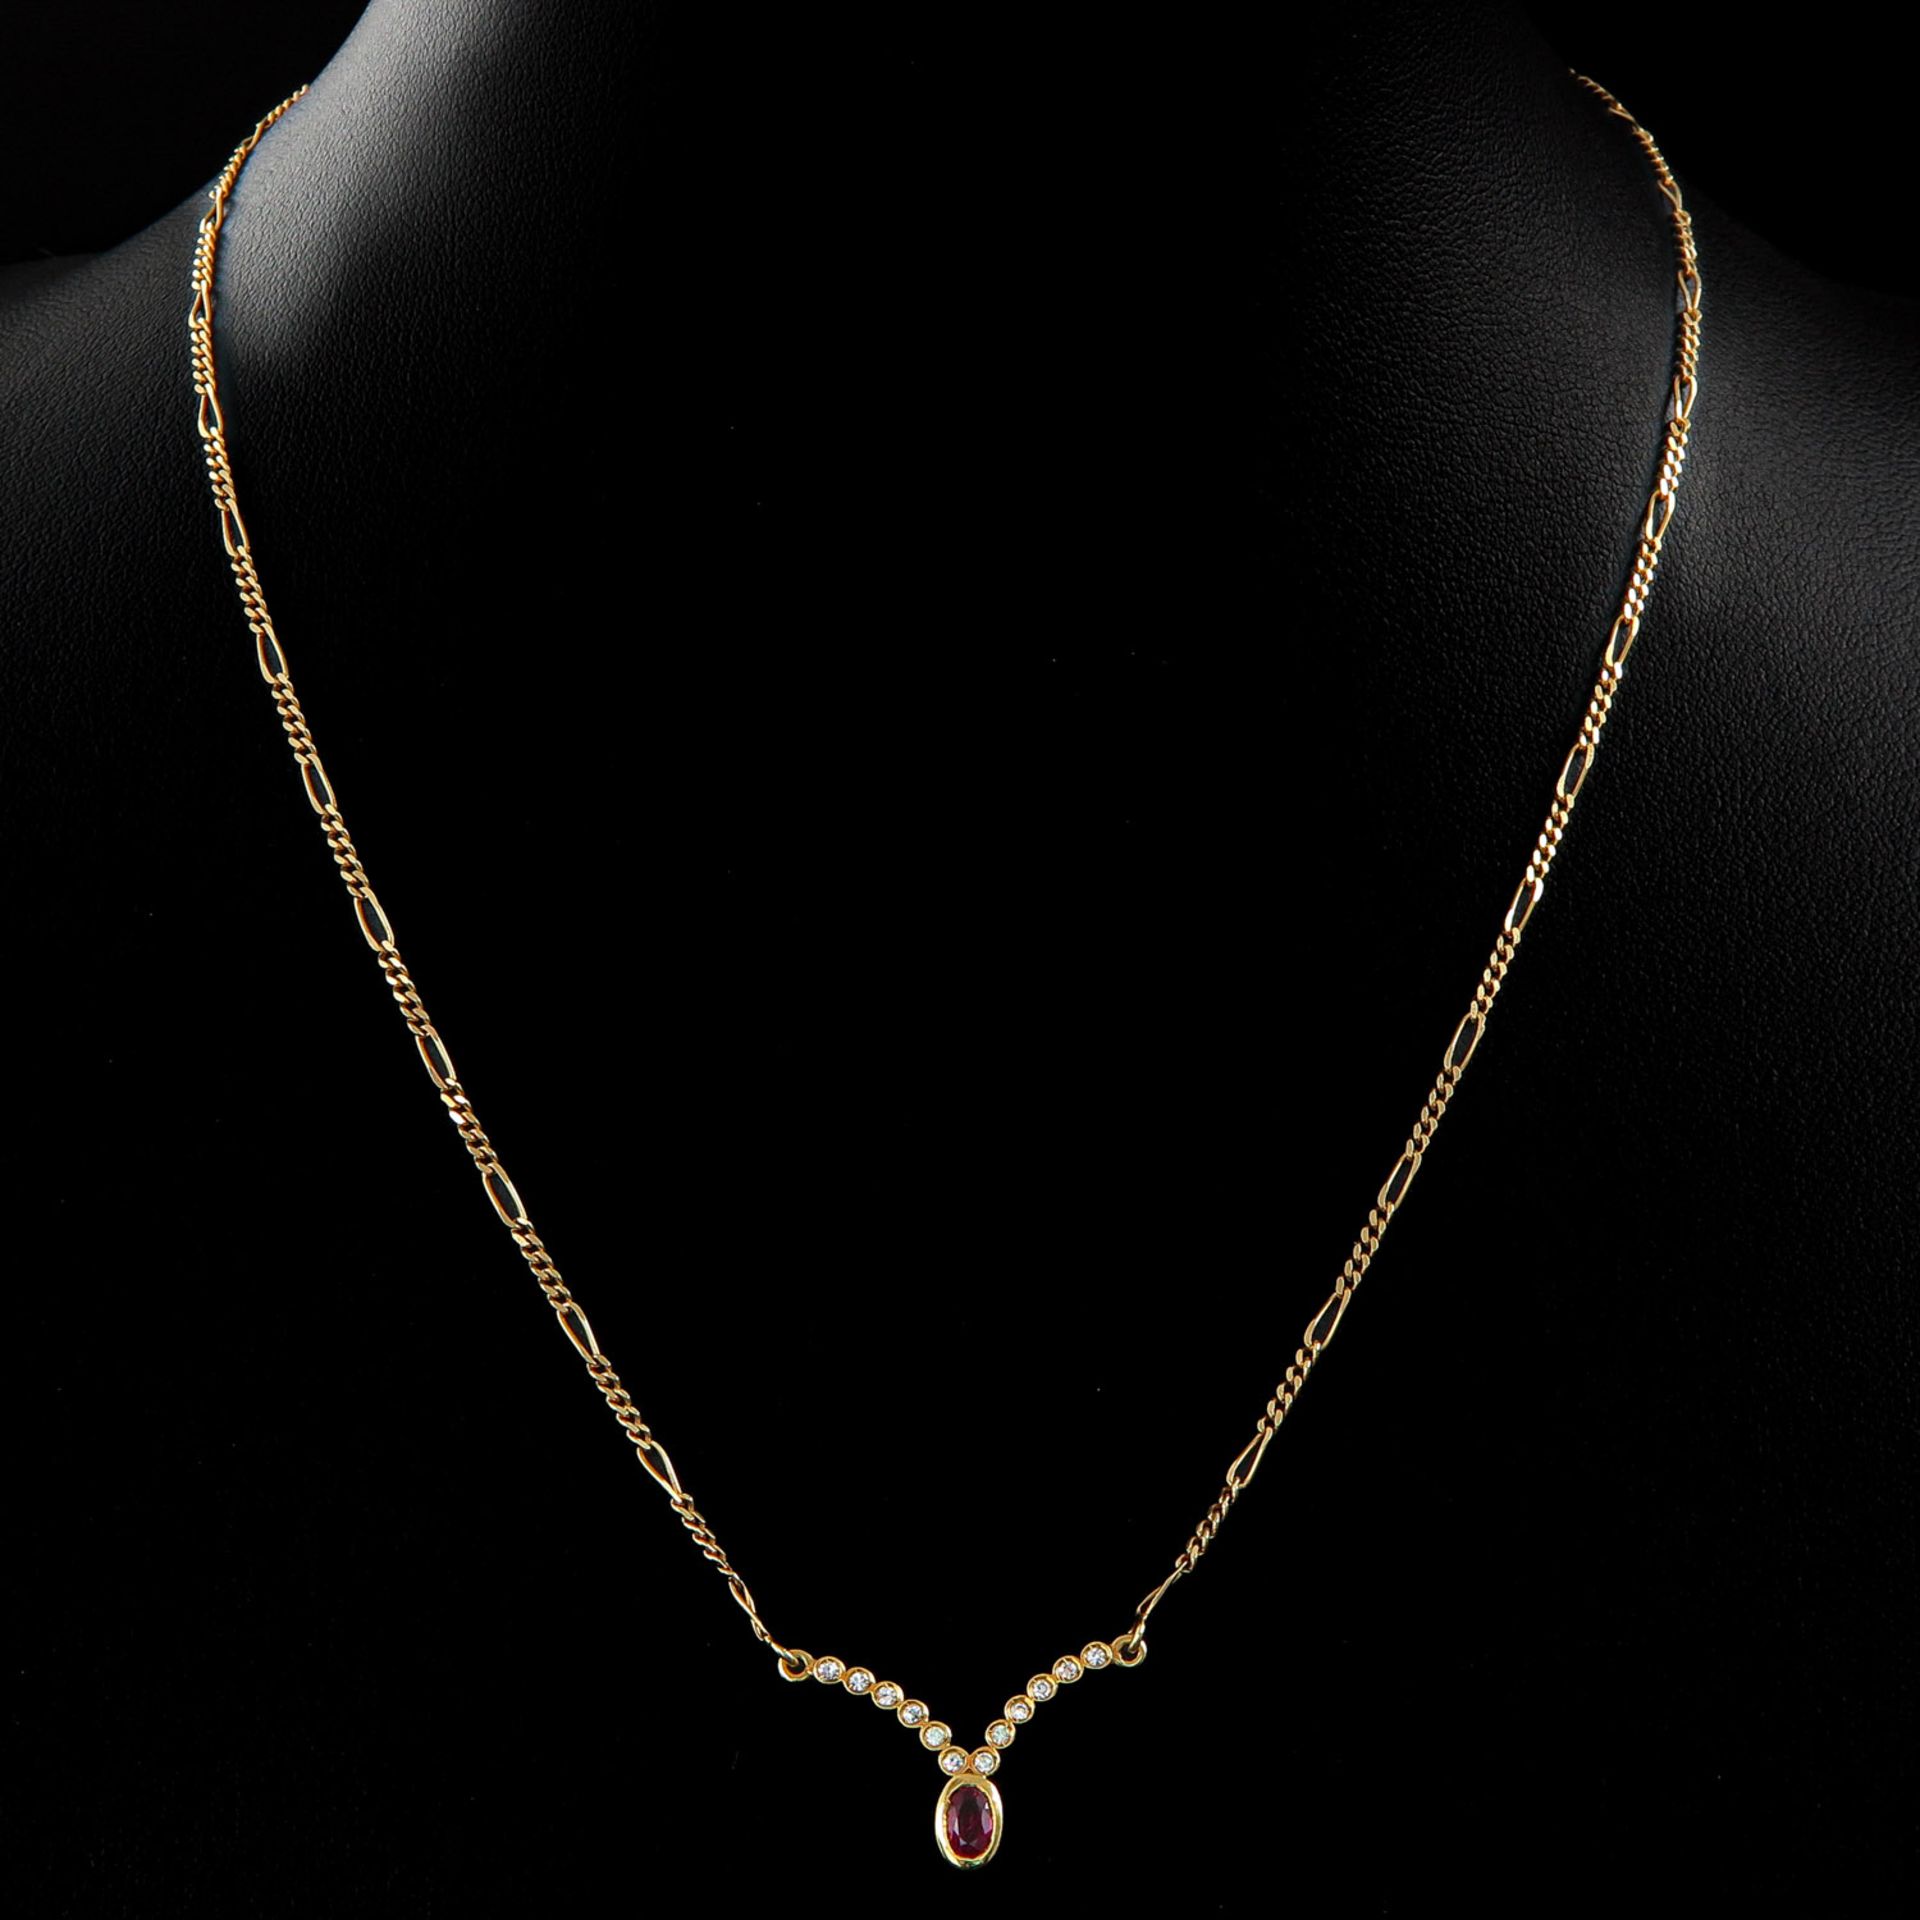 An 18KG Pendant and Necklace - Image 4 of 4